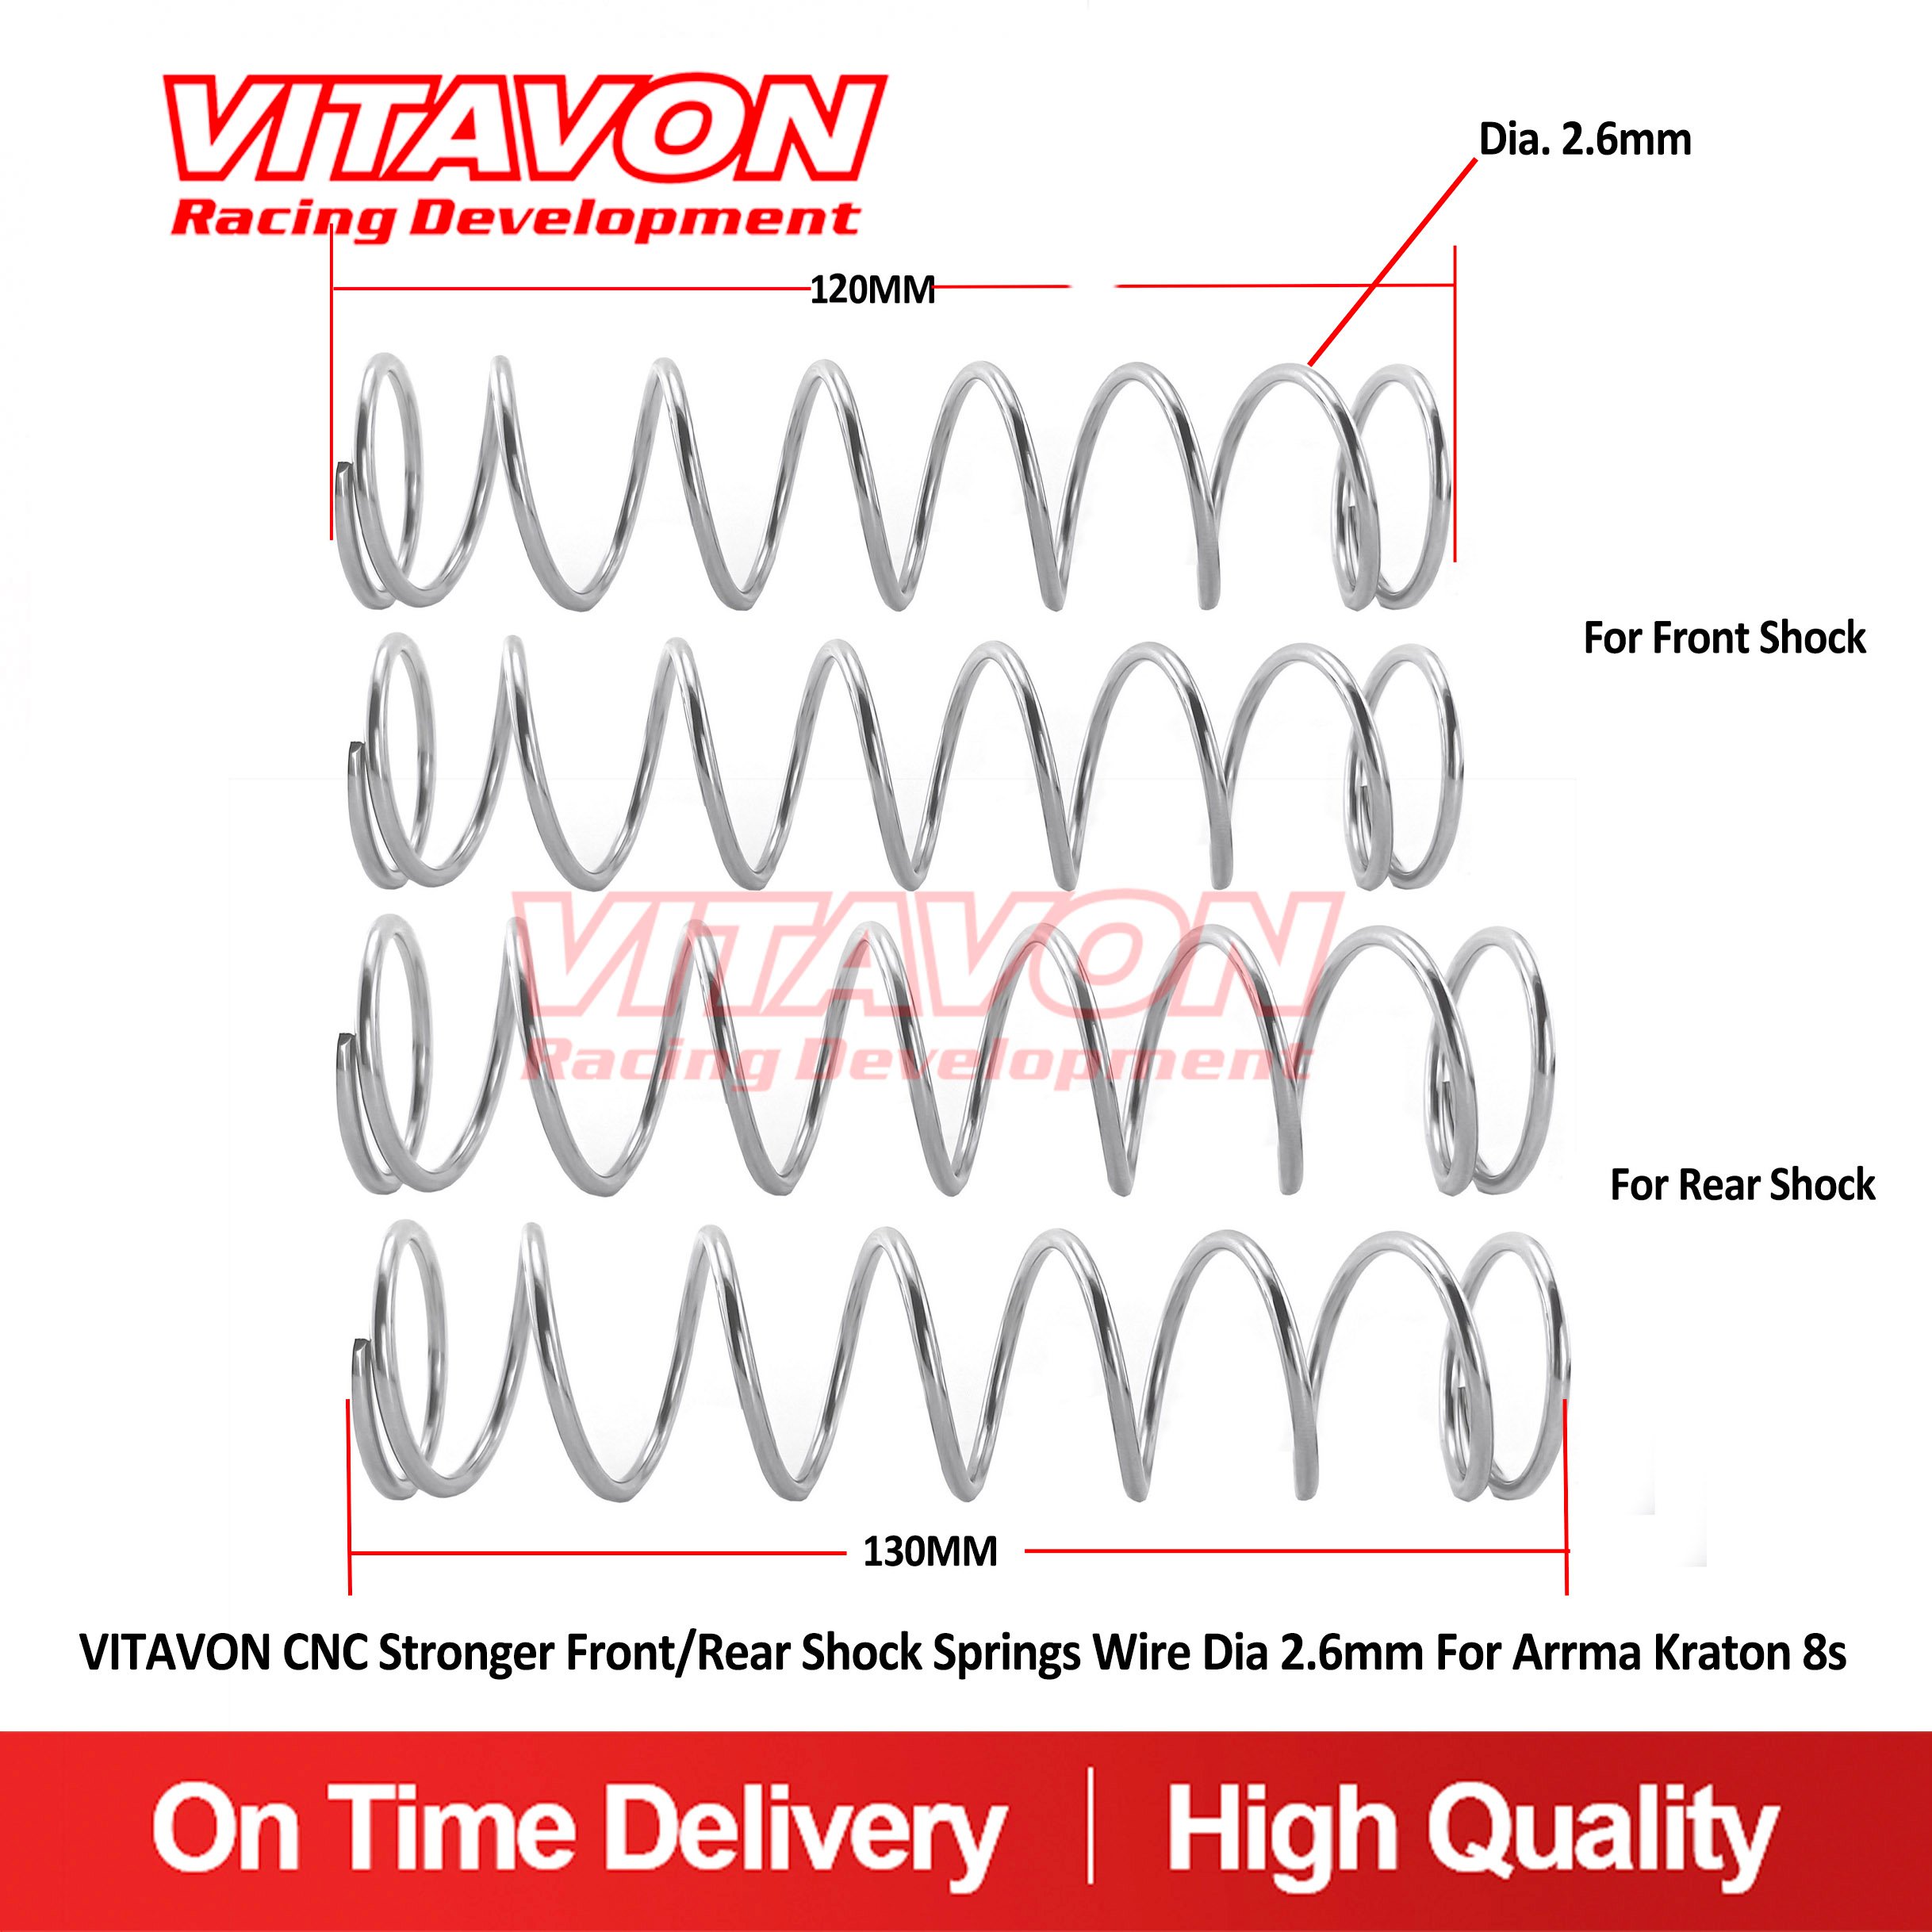 VITAVON CNC Stronger Front/Rear shock Springs Wire Dia 2.6mm For Arrma Kraton 8s